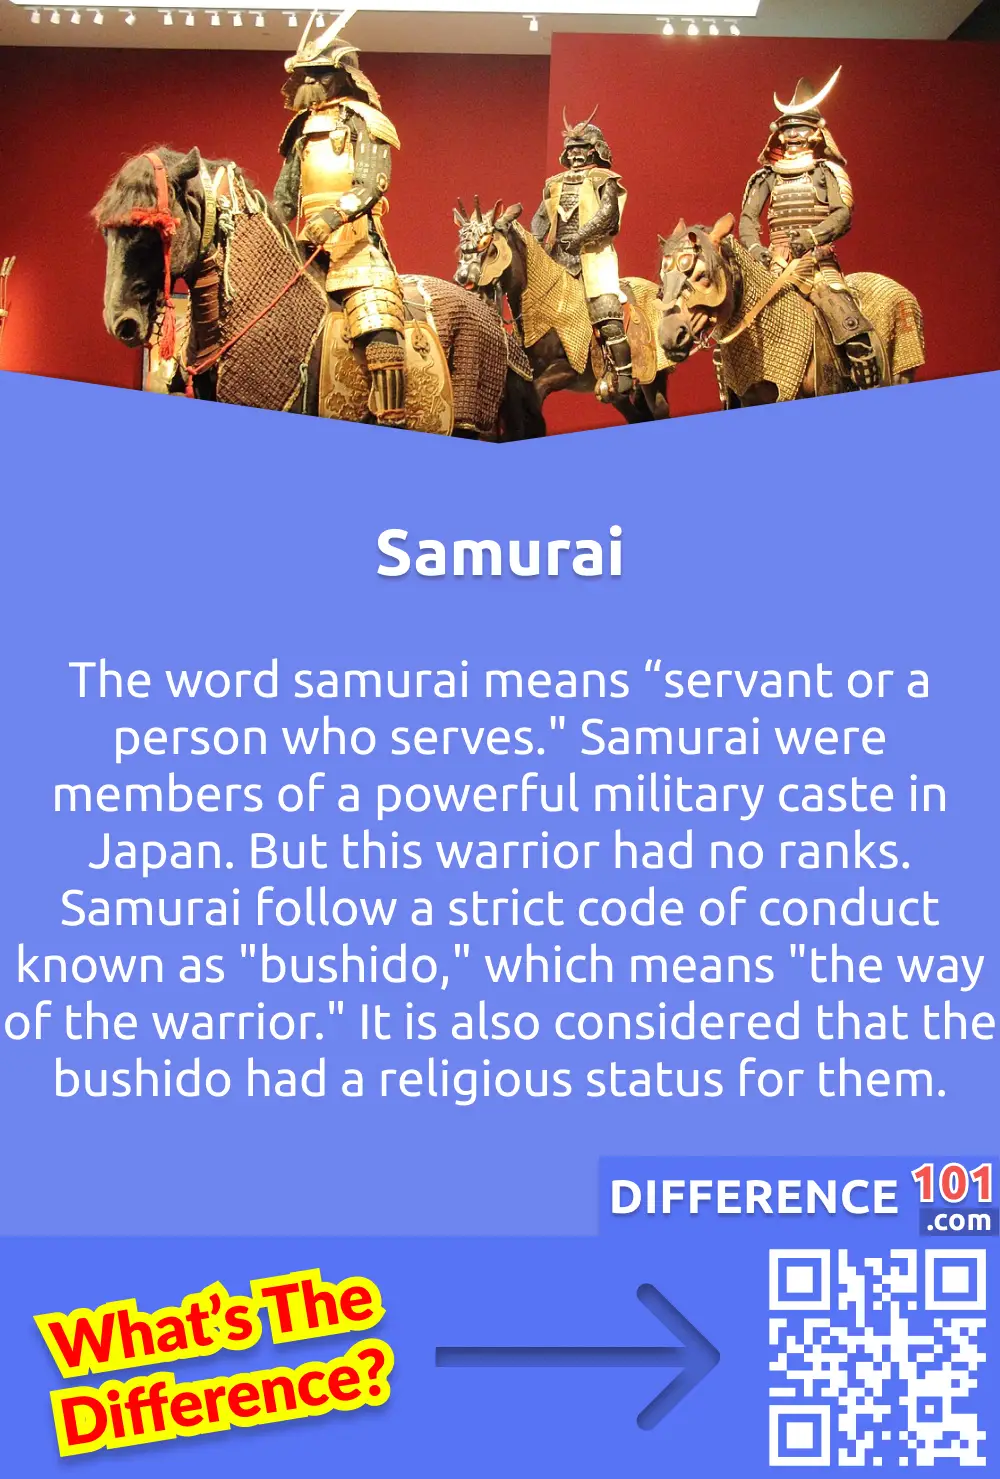 What Is a Samurai? The word samurai means “servant or a person who serves." Samurai were members of a powerful military caste in Japan. But this warrior had no ranks. Samurai follow a strict code of conduct known as "bushido," which means "the way of the warrior." It is also considered that the bushido had a religious status for them. 